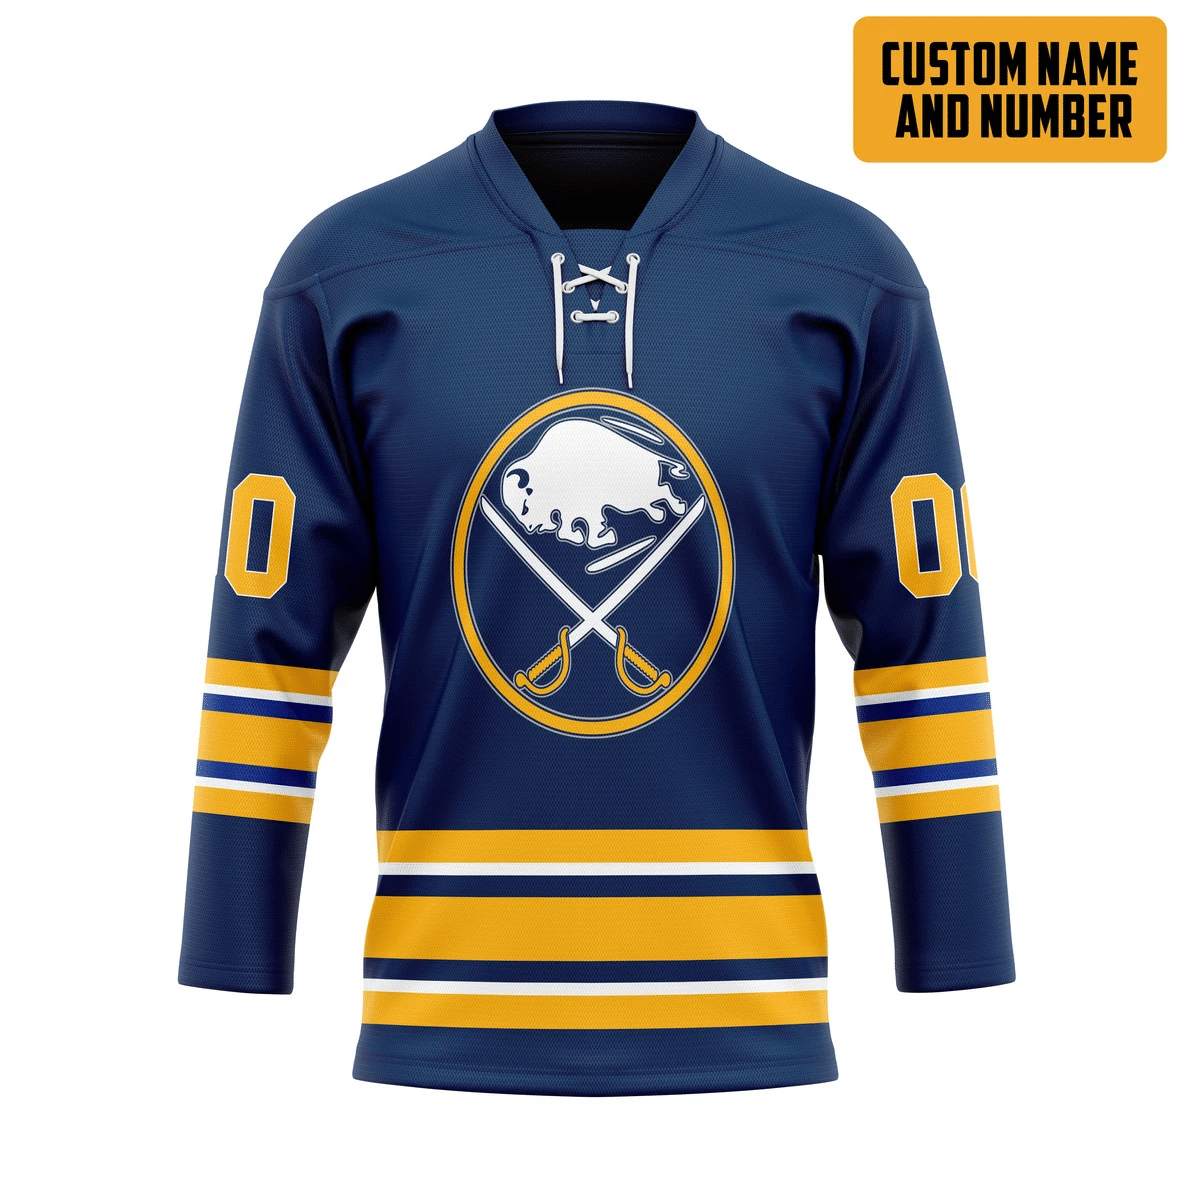 The hockey jersey is one of the most important items to have as a sports fan. 173